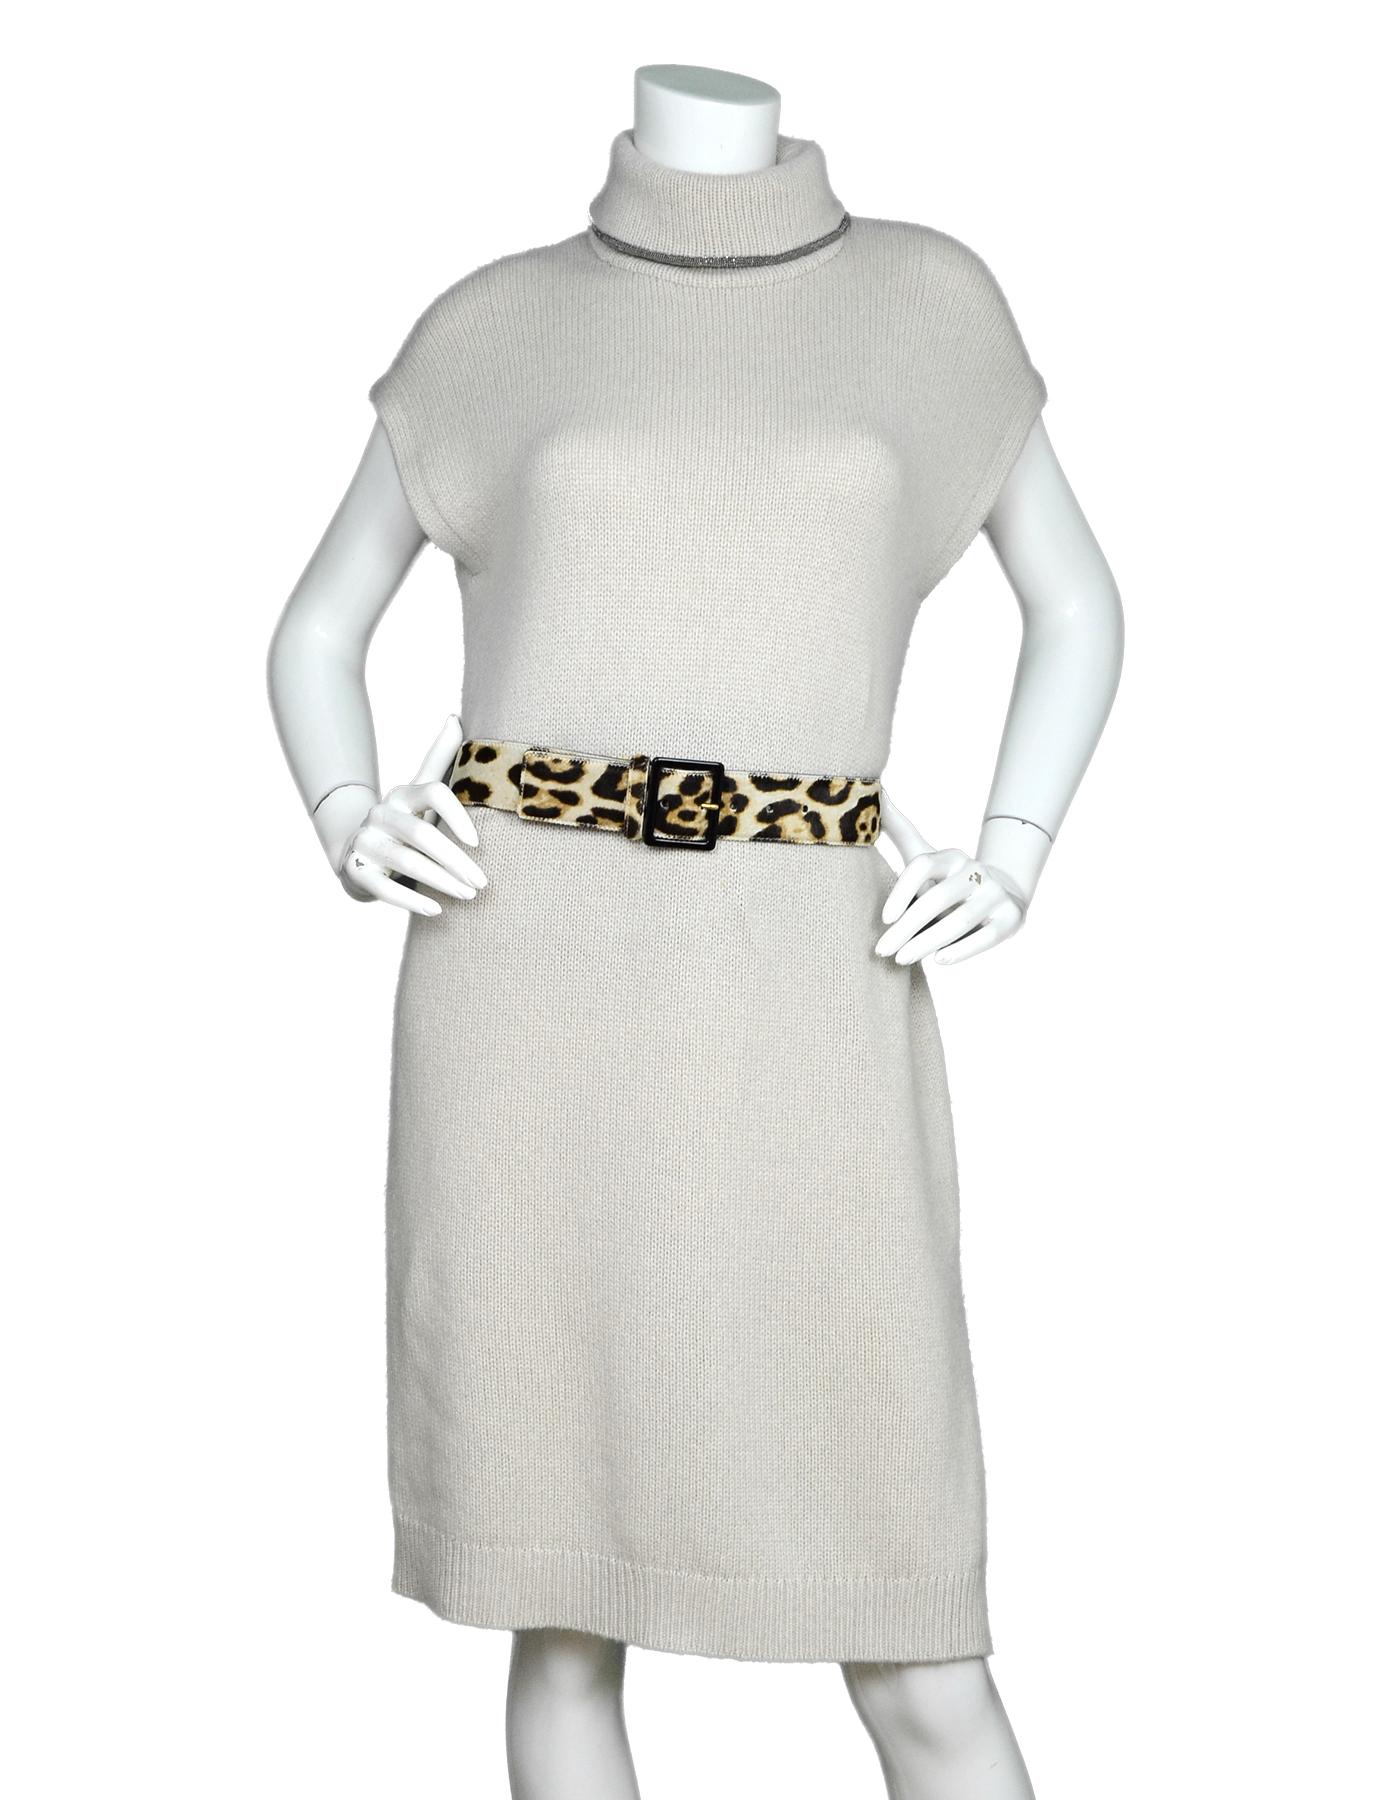 YSL Yves Saint Laurent Pony Hair Tan/Brown Leopard Print Belt Sz S.
Belt Only, Pictured With Brunello Cucinelli Cashmere Dress, Item #6527-20

Made In: Italy
Color: Tan/brown
Hardware: Black
Materials: Pony hair, leather and metal
Lining: Black